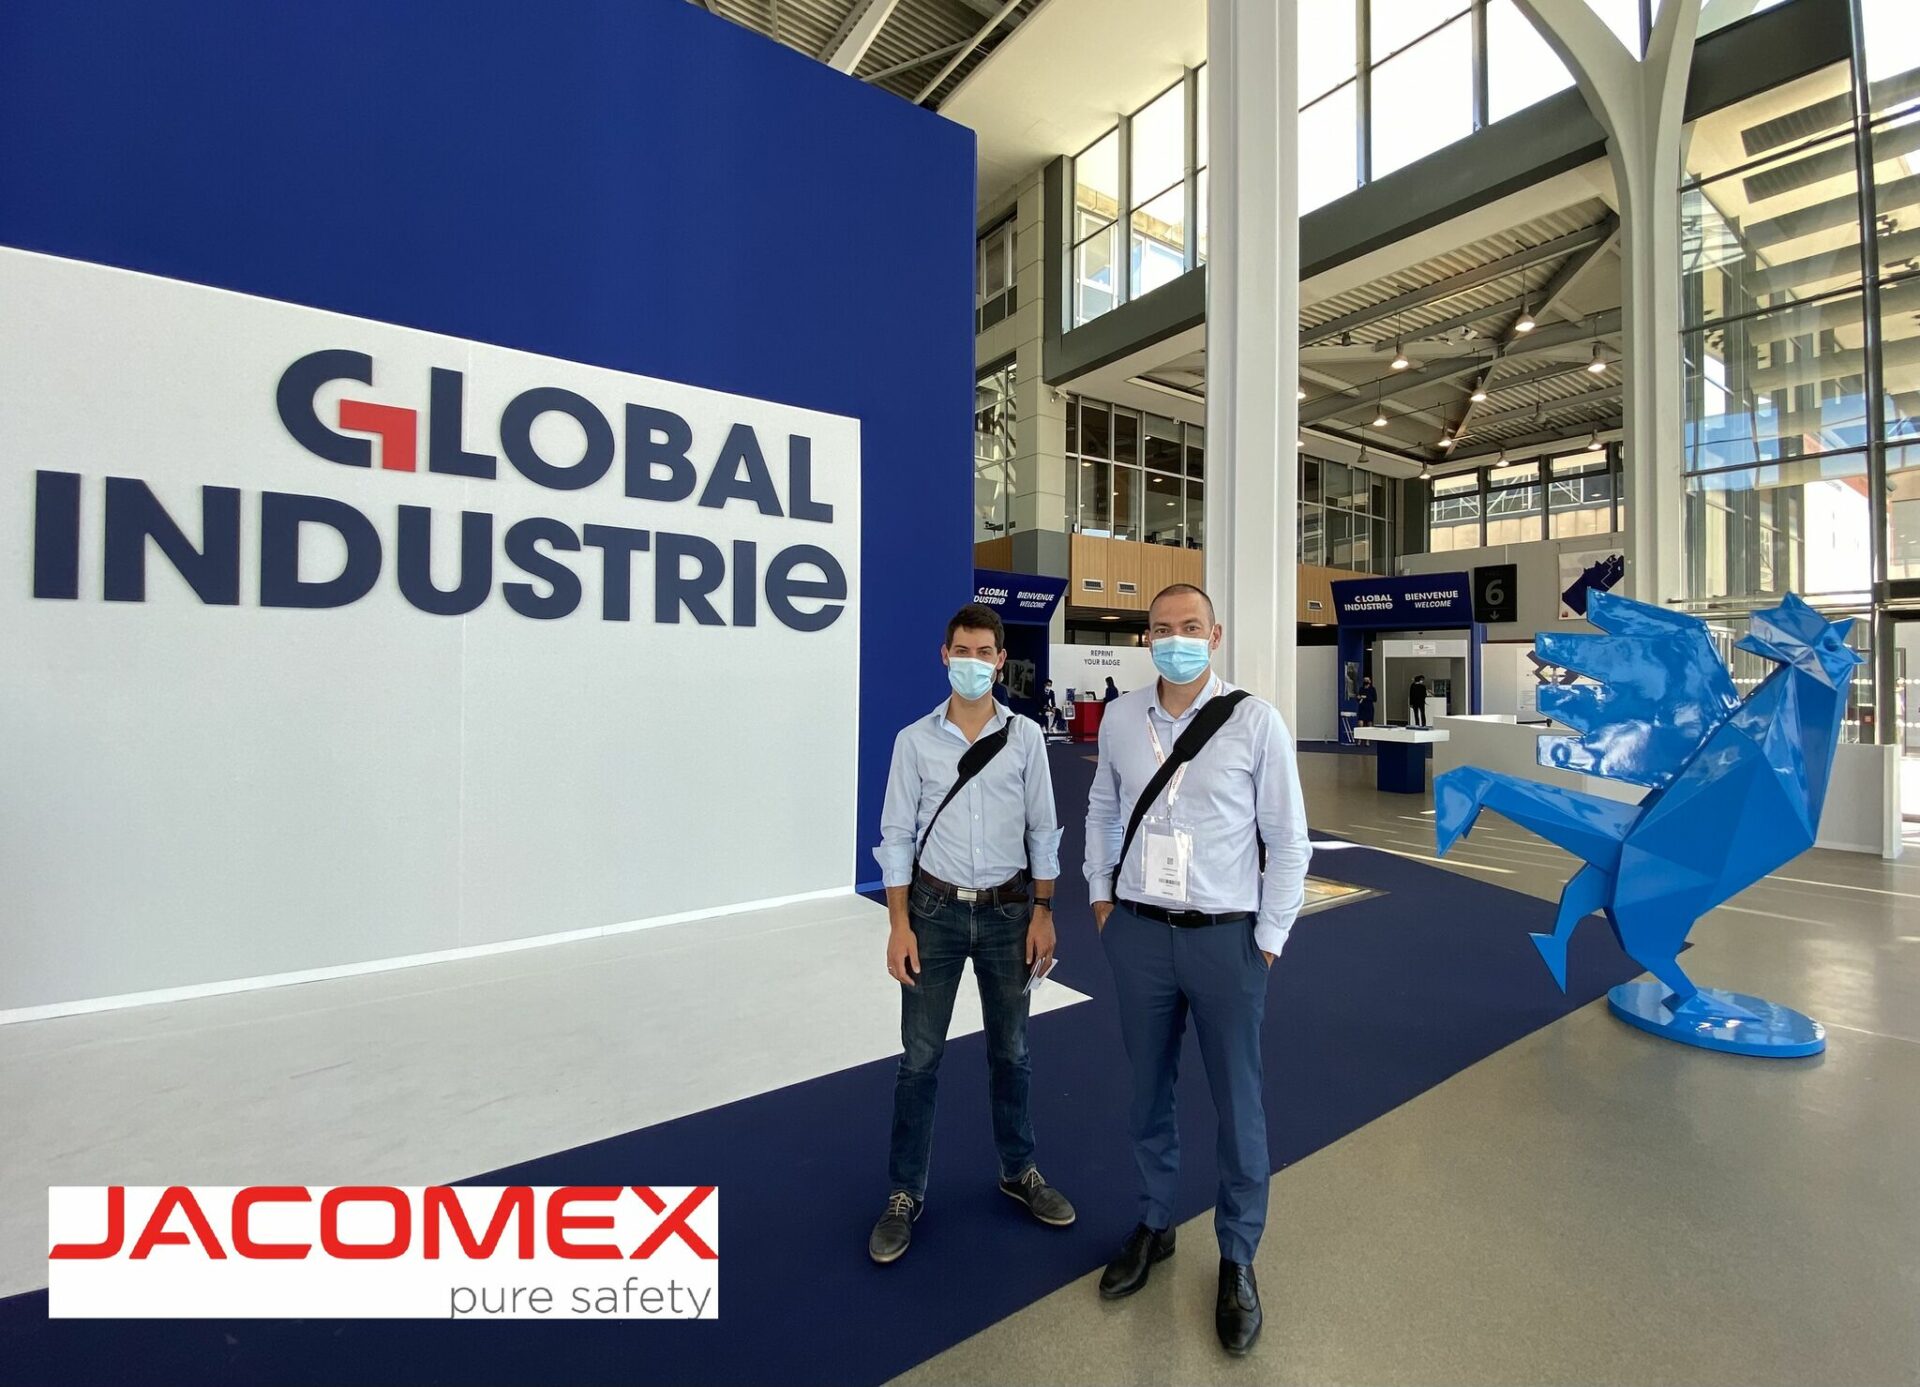 Both Chris are at GLOBAL INDUSTRIE!